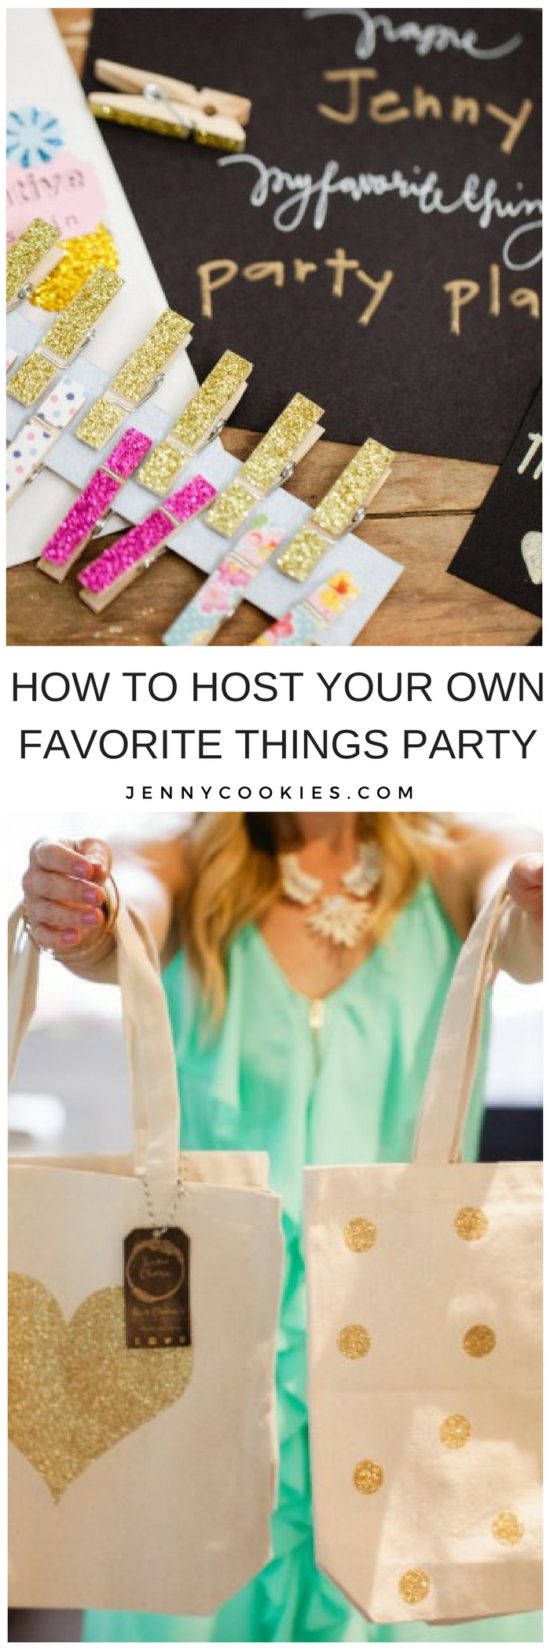 Jenny Cookies Favorite Things and Book Launch Party | how to host a favorite things party | how to host a book lauch party | favorite things party gift ideas | book launch party ideas | book launch ideas || JennyCookies.com #favoritethingsparty #booklaunch #booklaunchparty